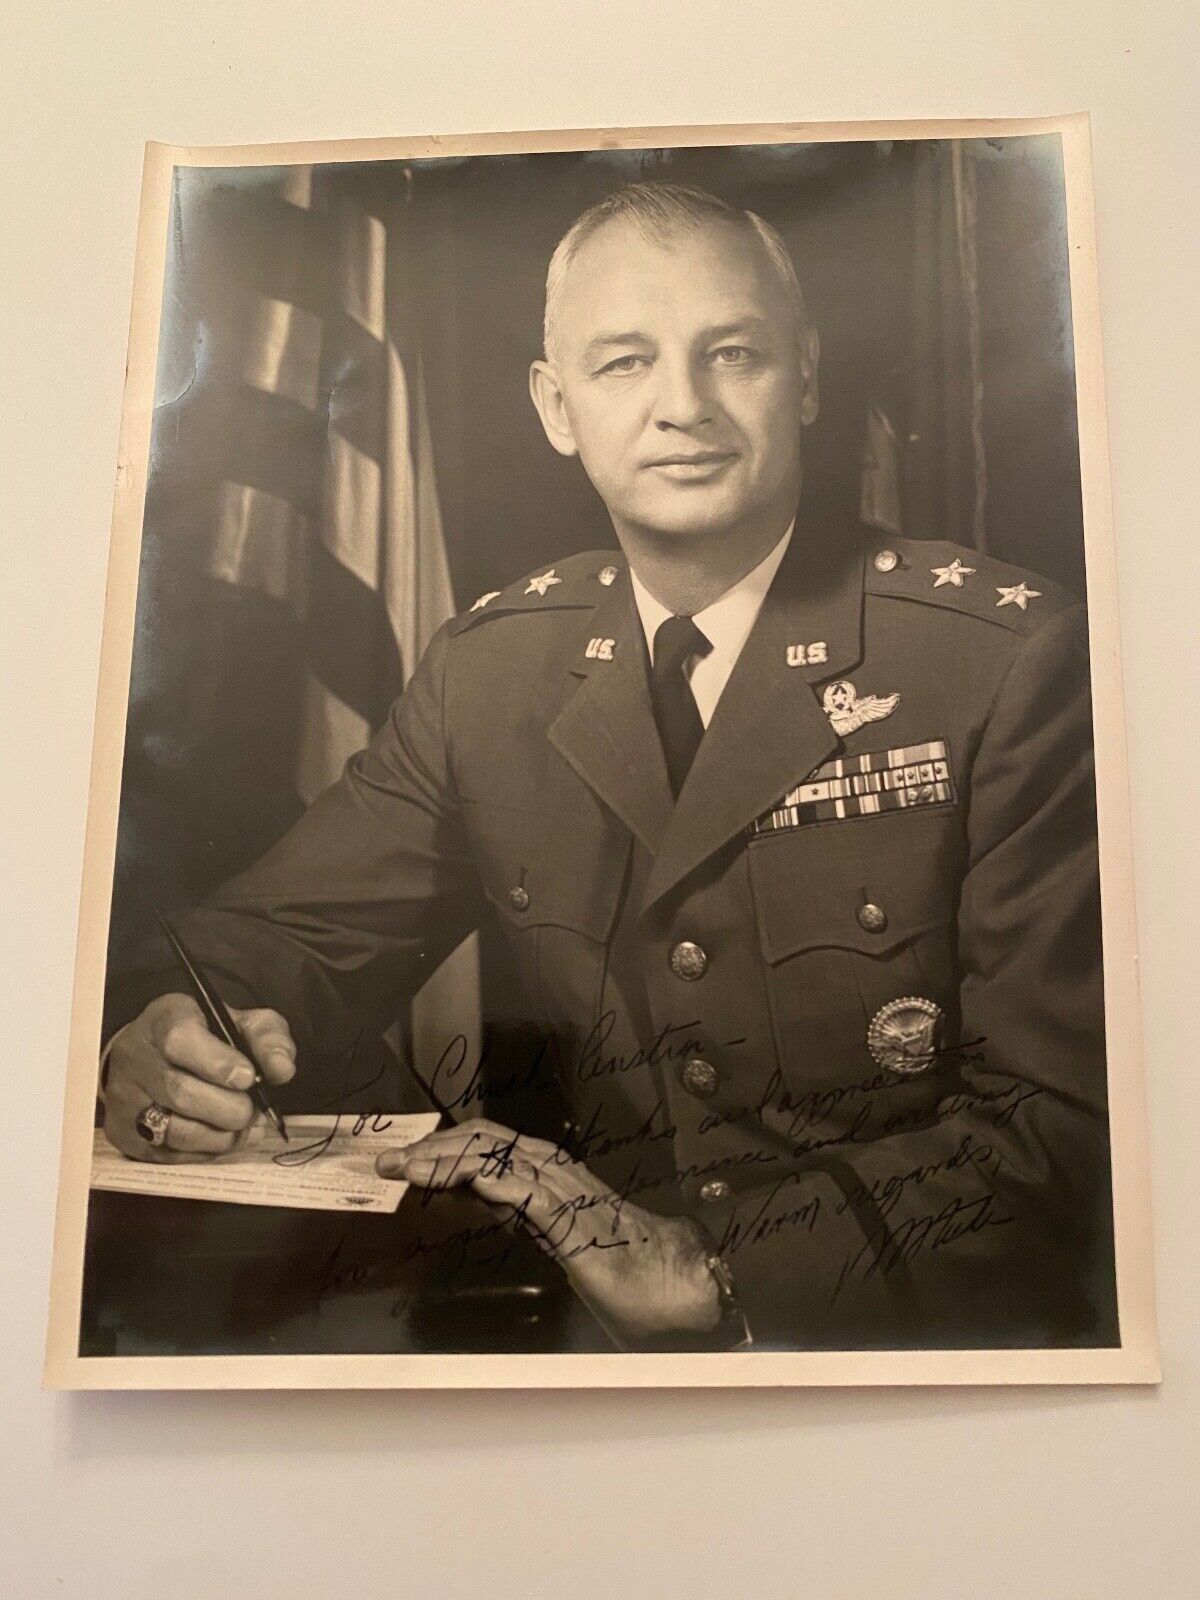 OA3) Official 1960s United States US Army Major General Signed Photograph